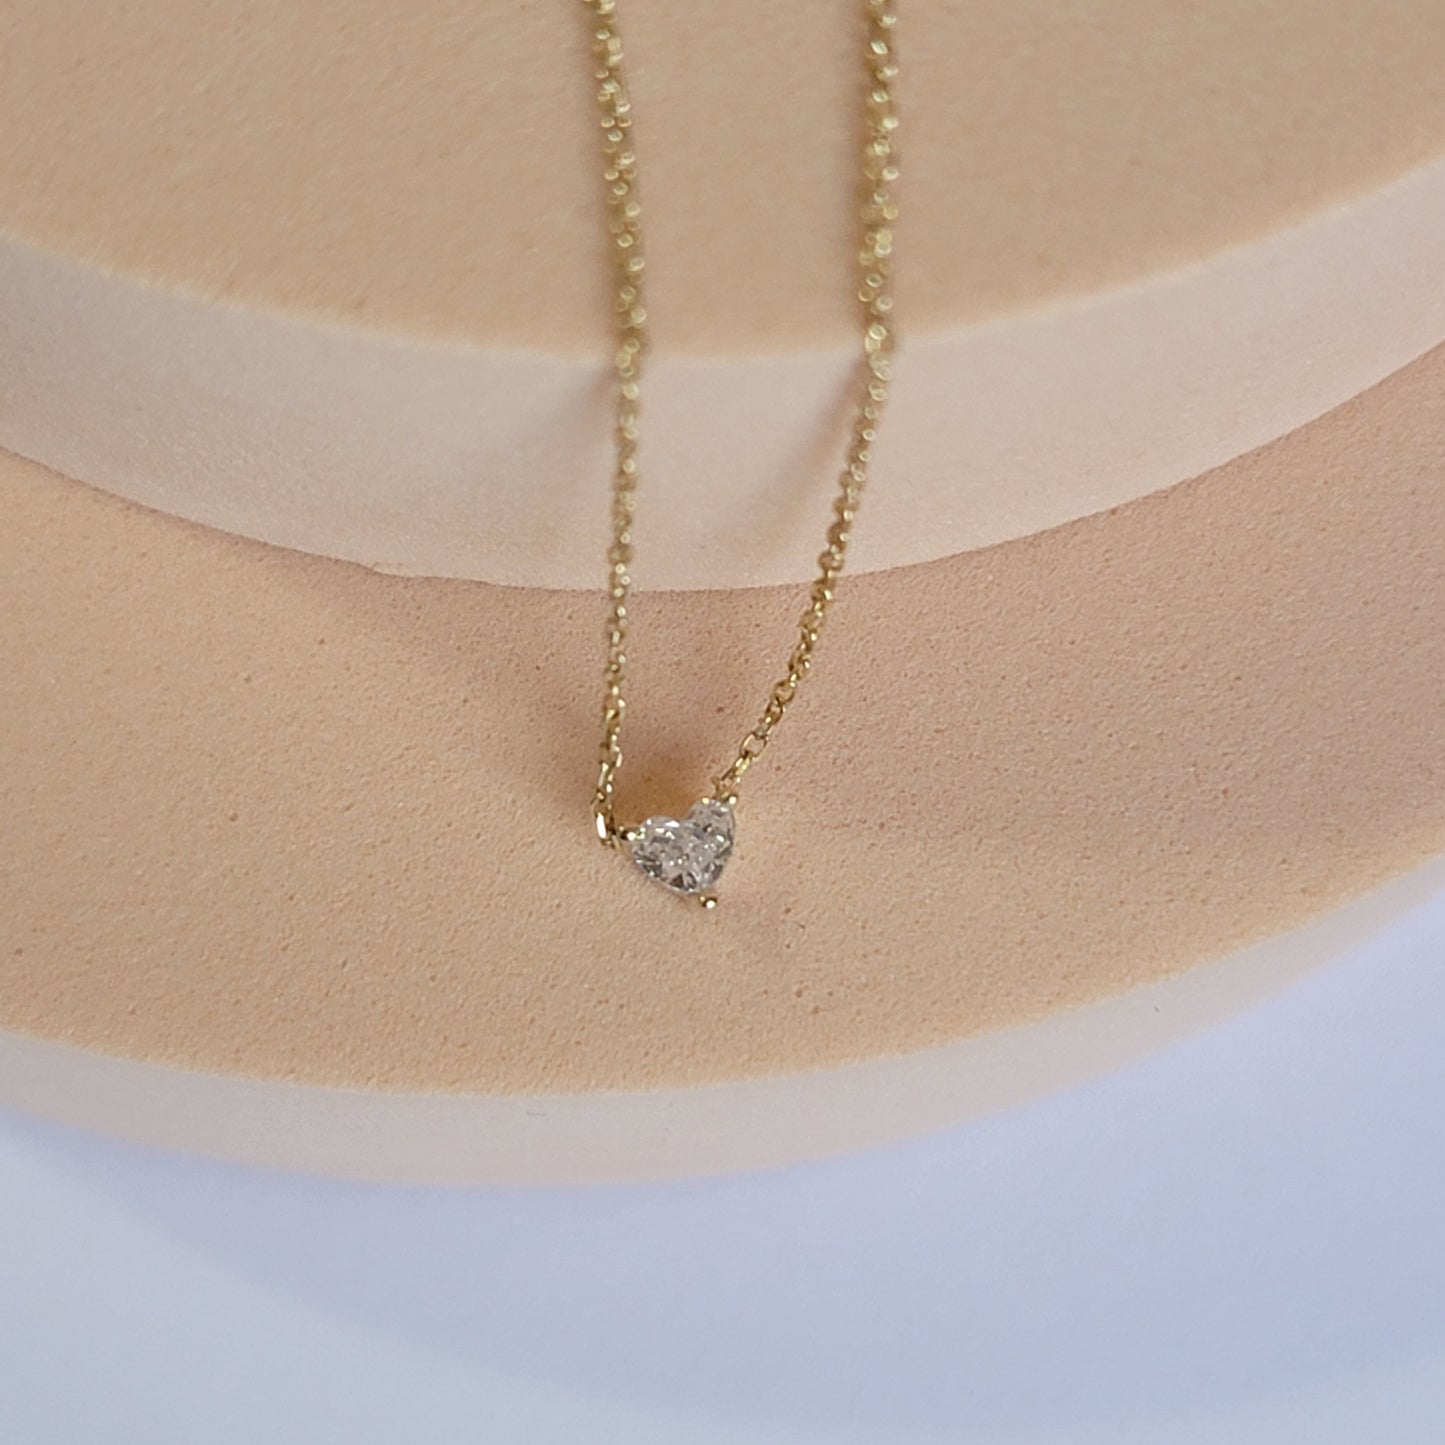 Diamond Solitaire Necklace in 14k Solid Gold, Bridesmaid Gift, Delicate Solitaire Necklace, Floating Diamond, Diamond Layering Necklace